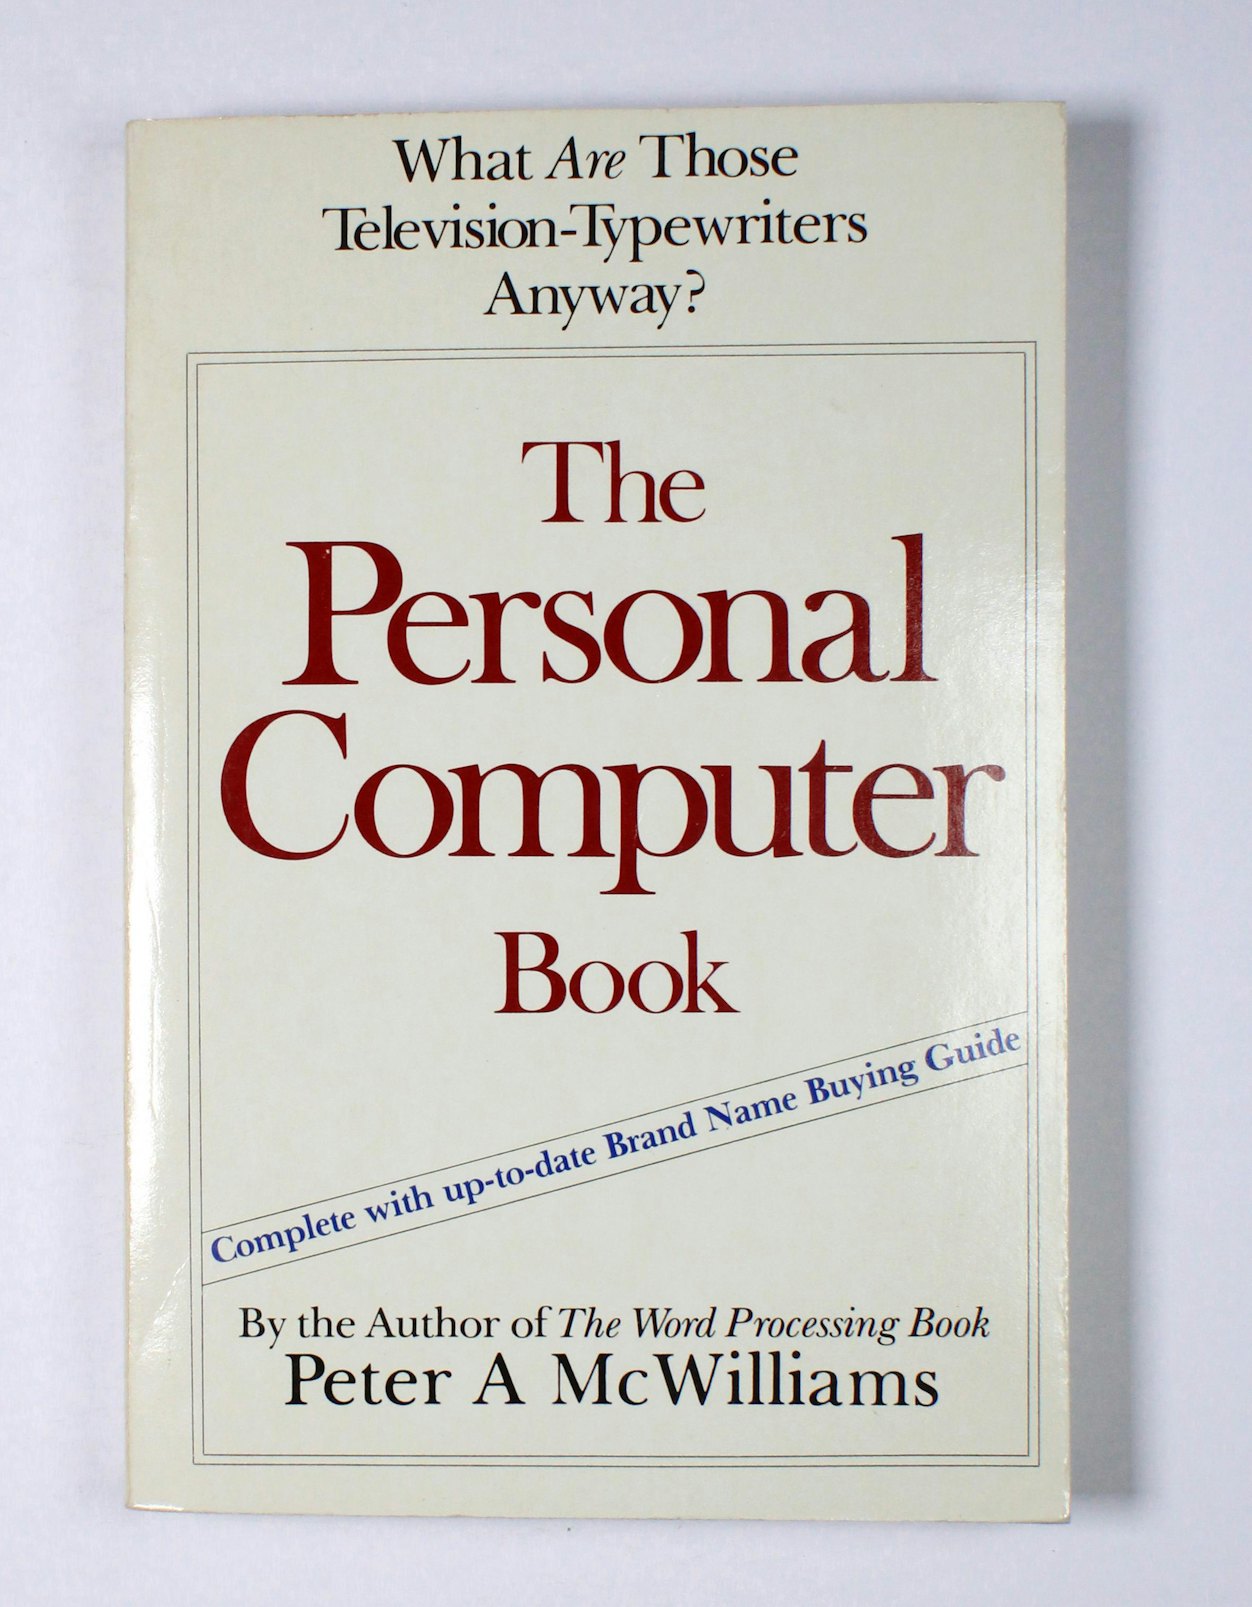 The Personal Computer Book